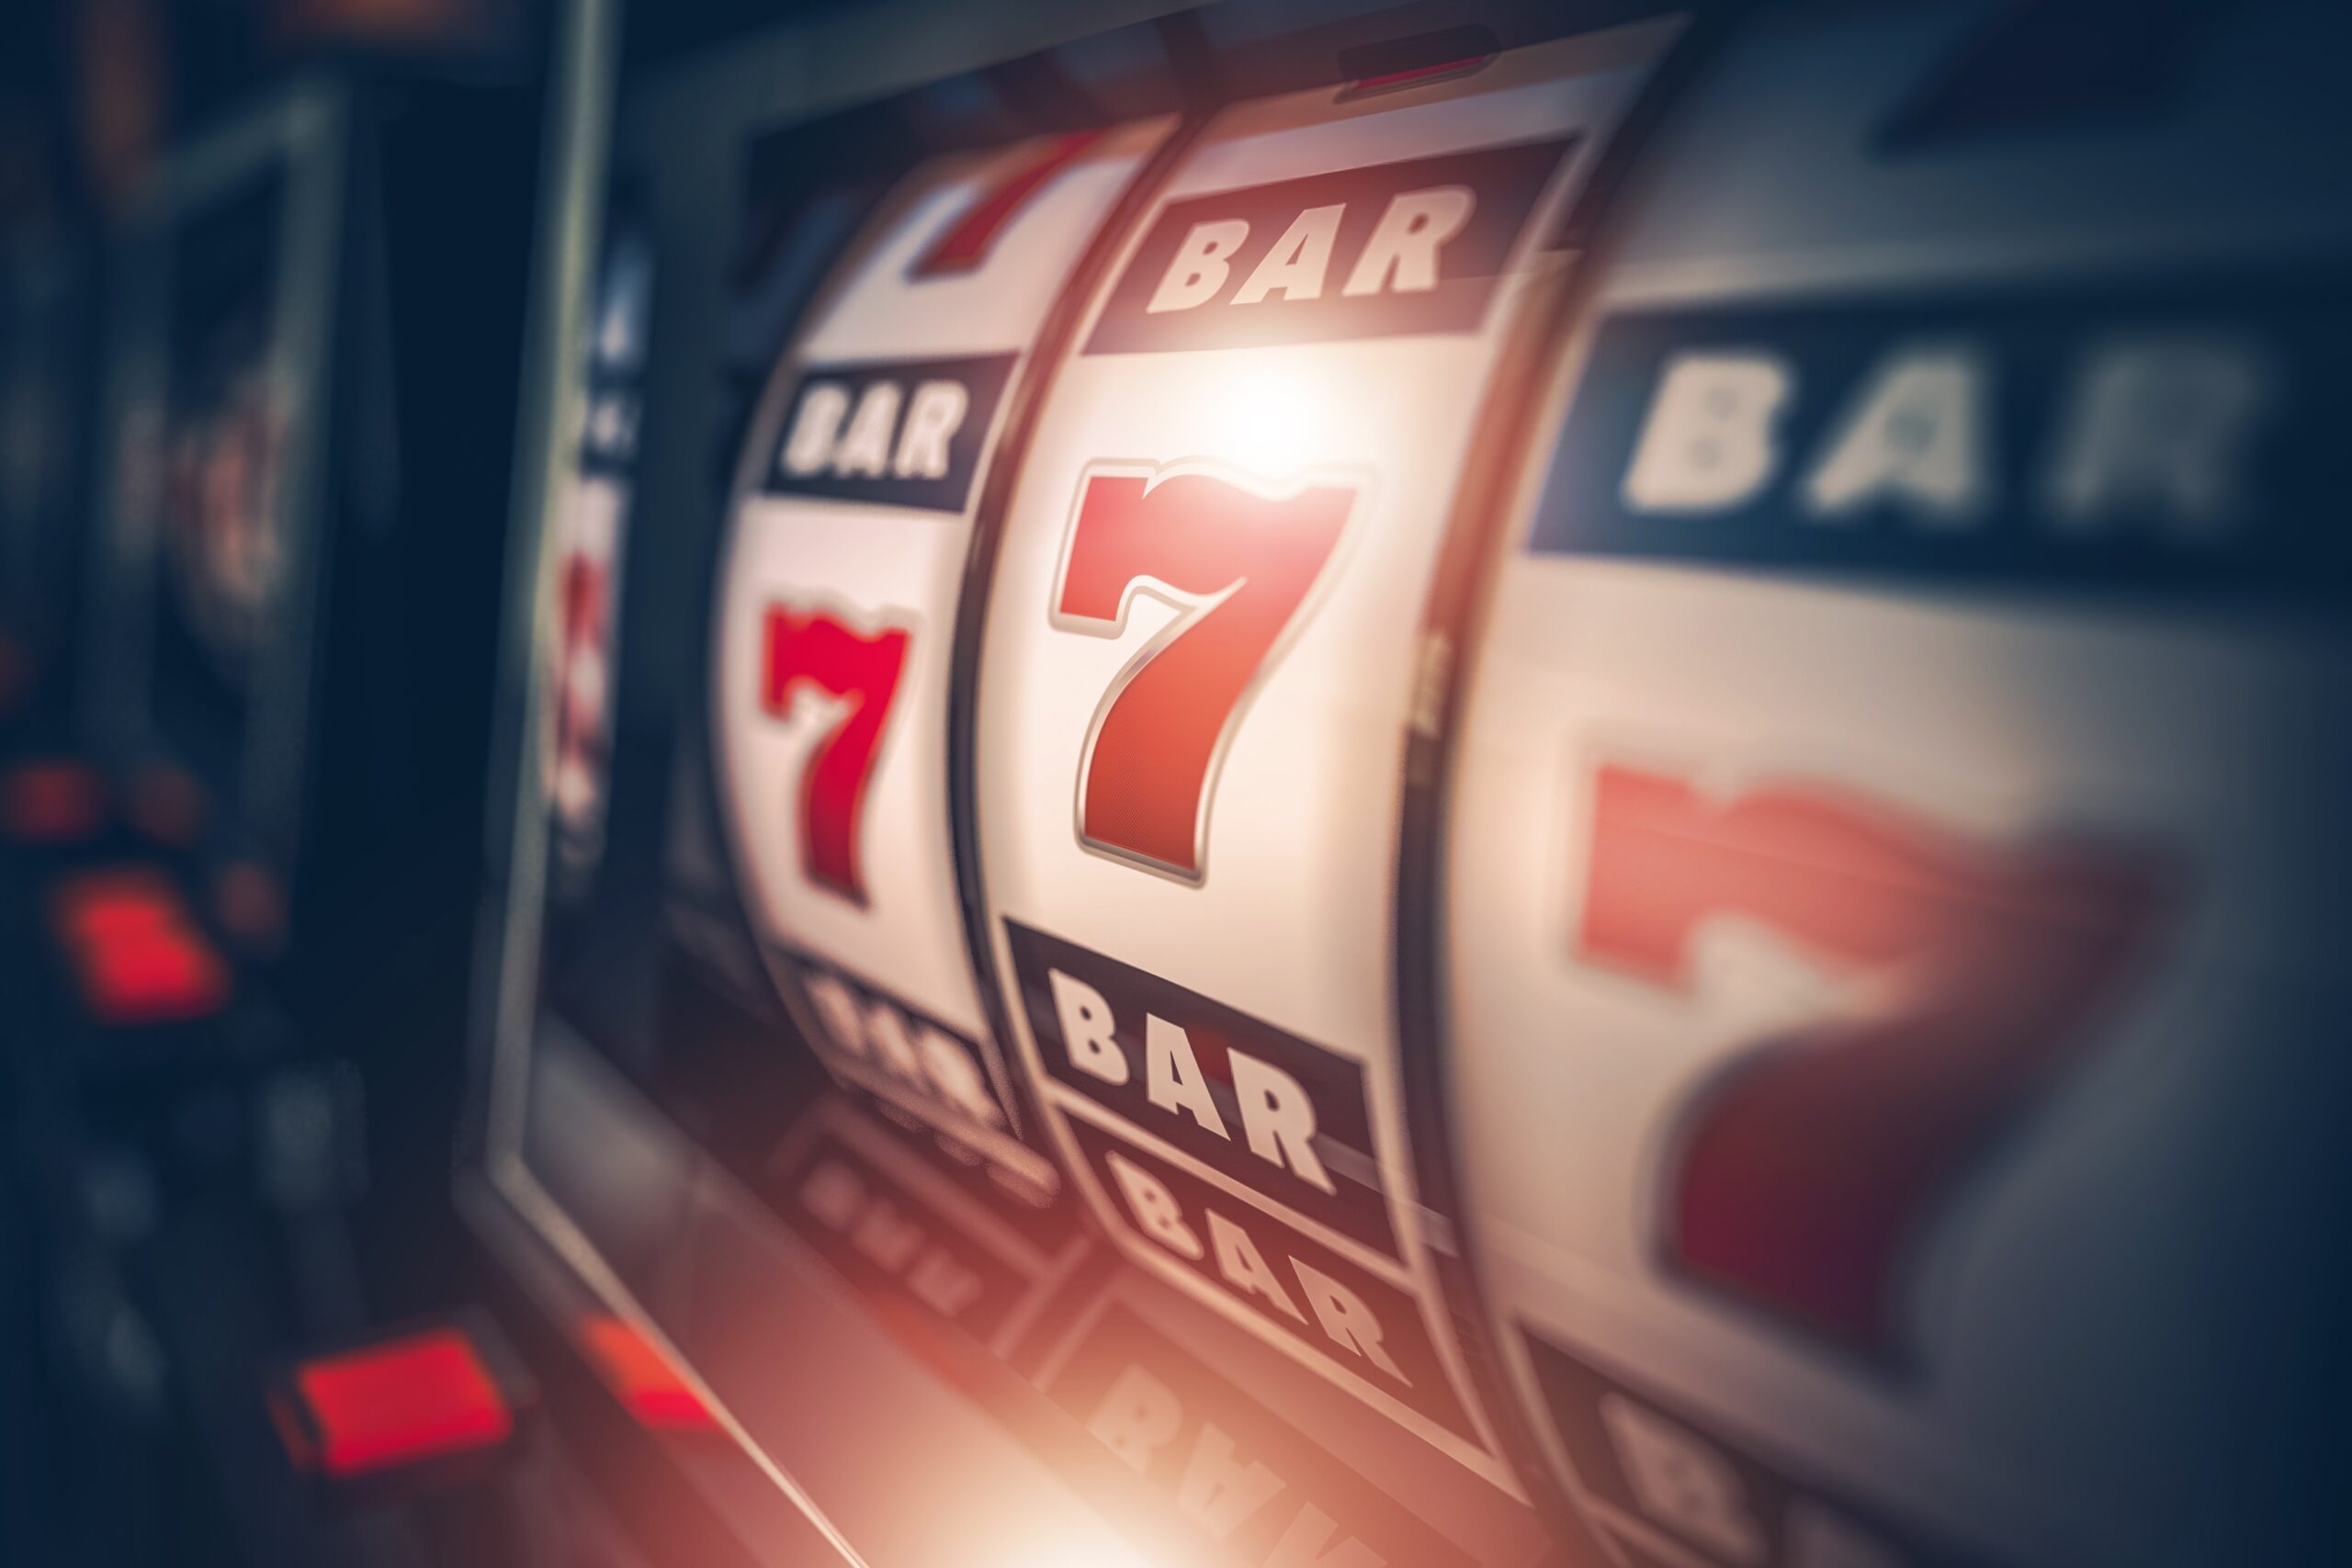 🎰 Top 5 Best Online Slots of 2021  Jackpots, free spins, and bonuses! 💰  